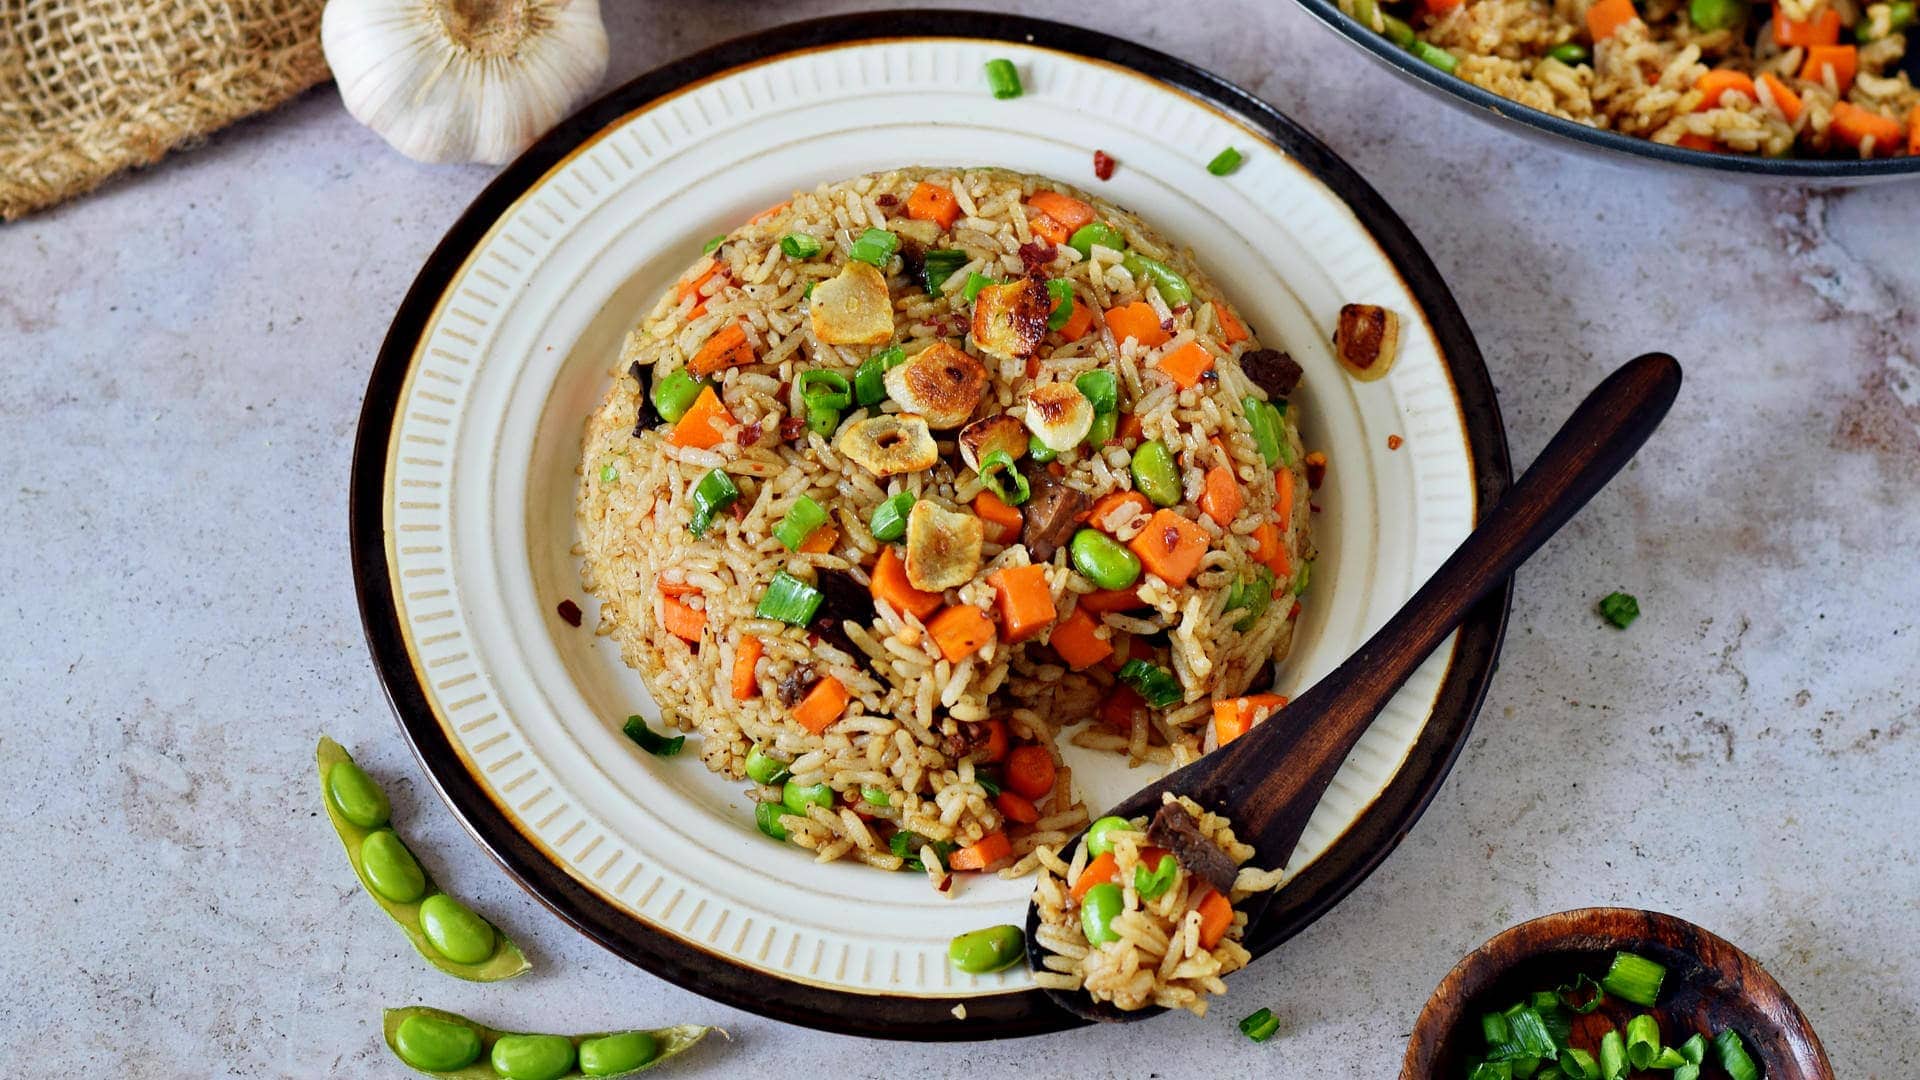 Japanese Hibachi fried rice with garlic and veggies on a plate